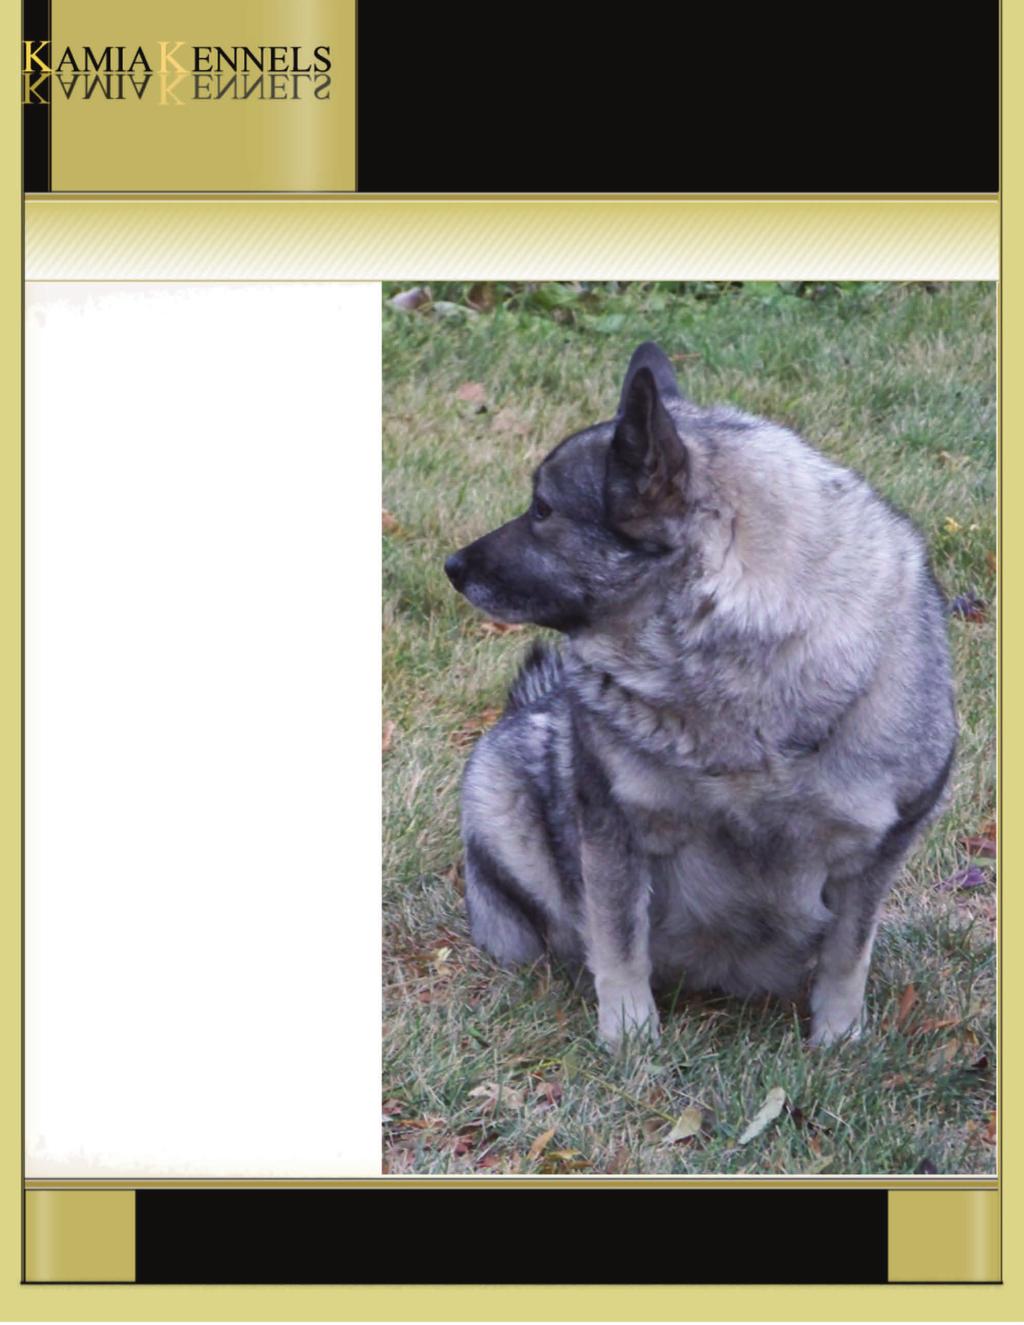 Mia, one great female Elkhound You can say what you like about Tora being a great female and prolific, well, make no mistake she is a daughter of one of the best females in Canada, Mia.